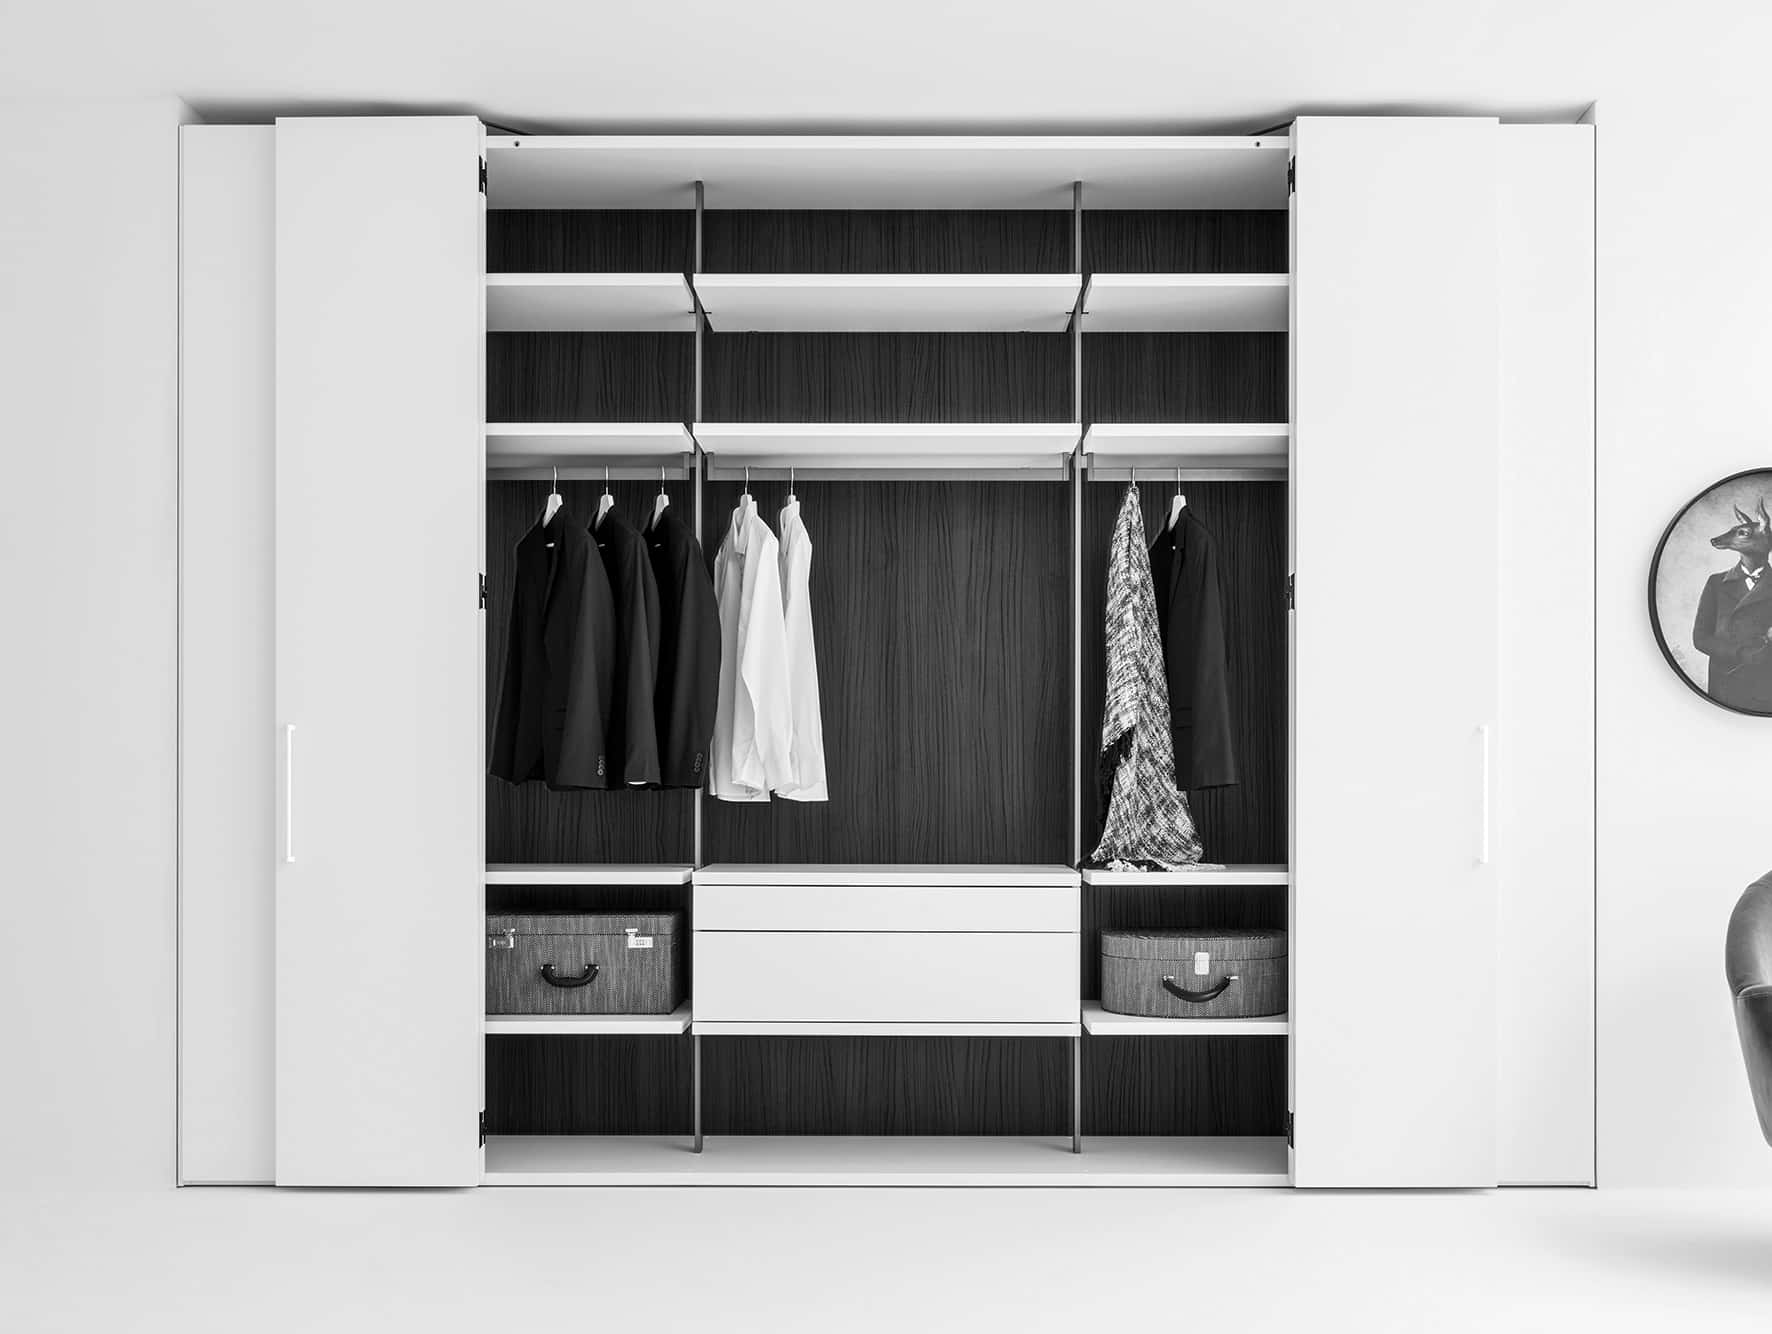 Inside the closets, struts replace dividing panels to make more room for clothes.